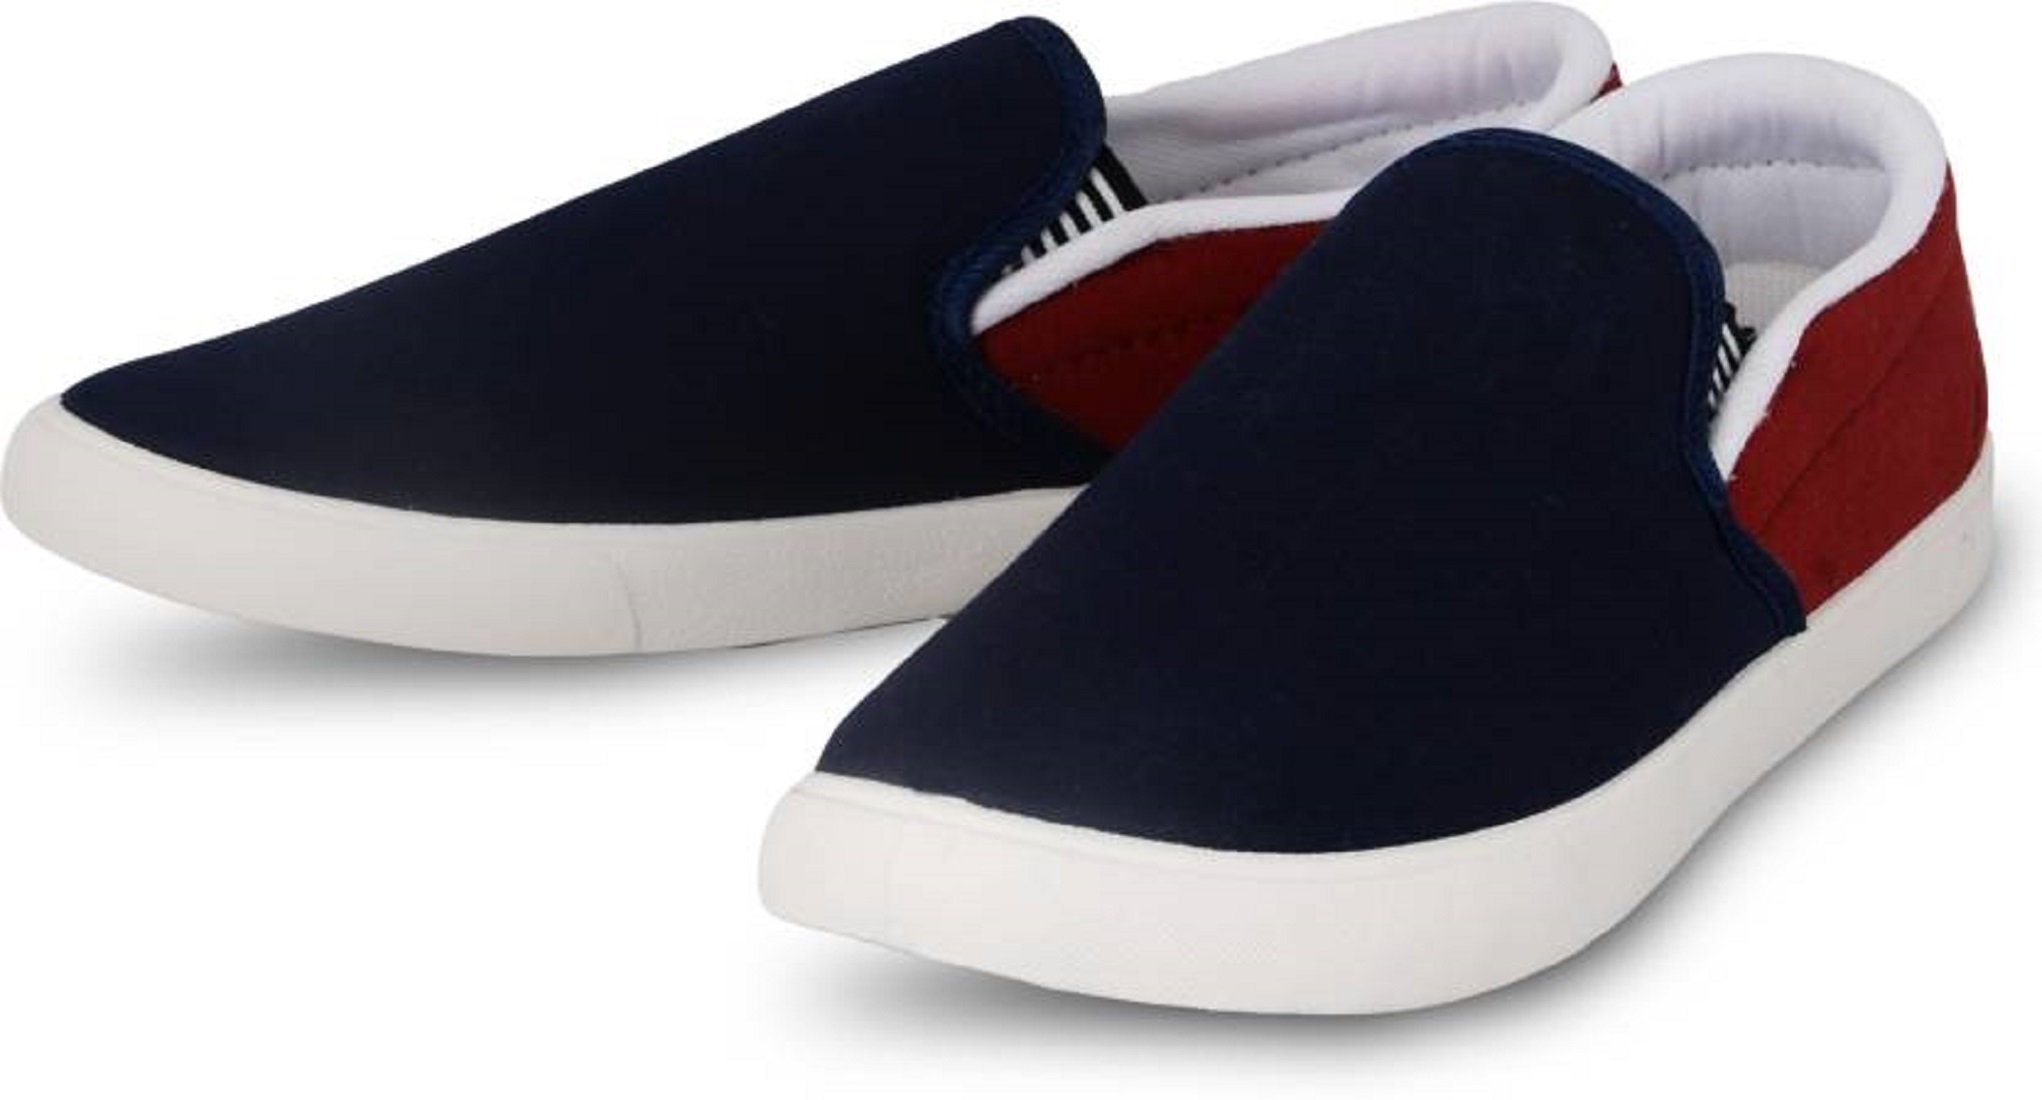 Buy Weldone Prime Loafers For Men Online @ ₹461 from ShopClues